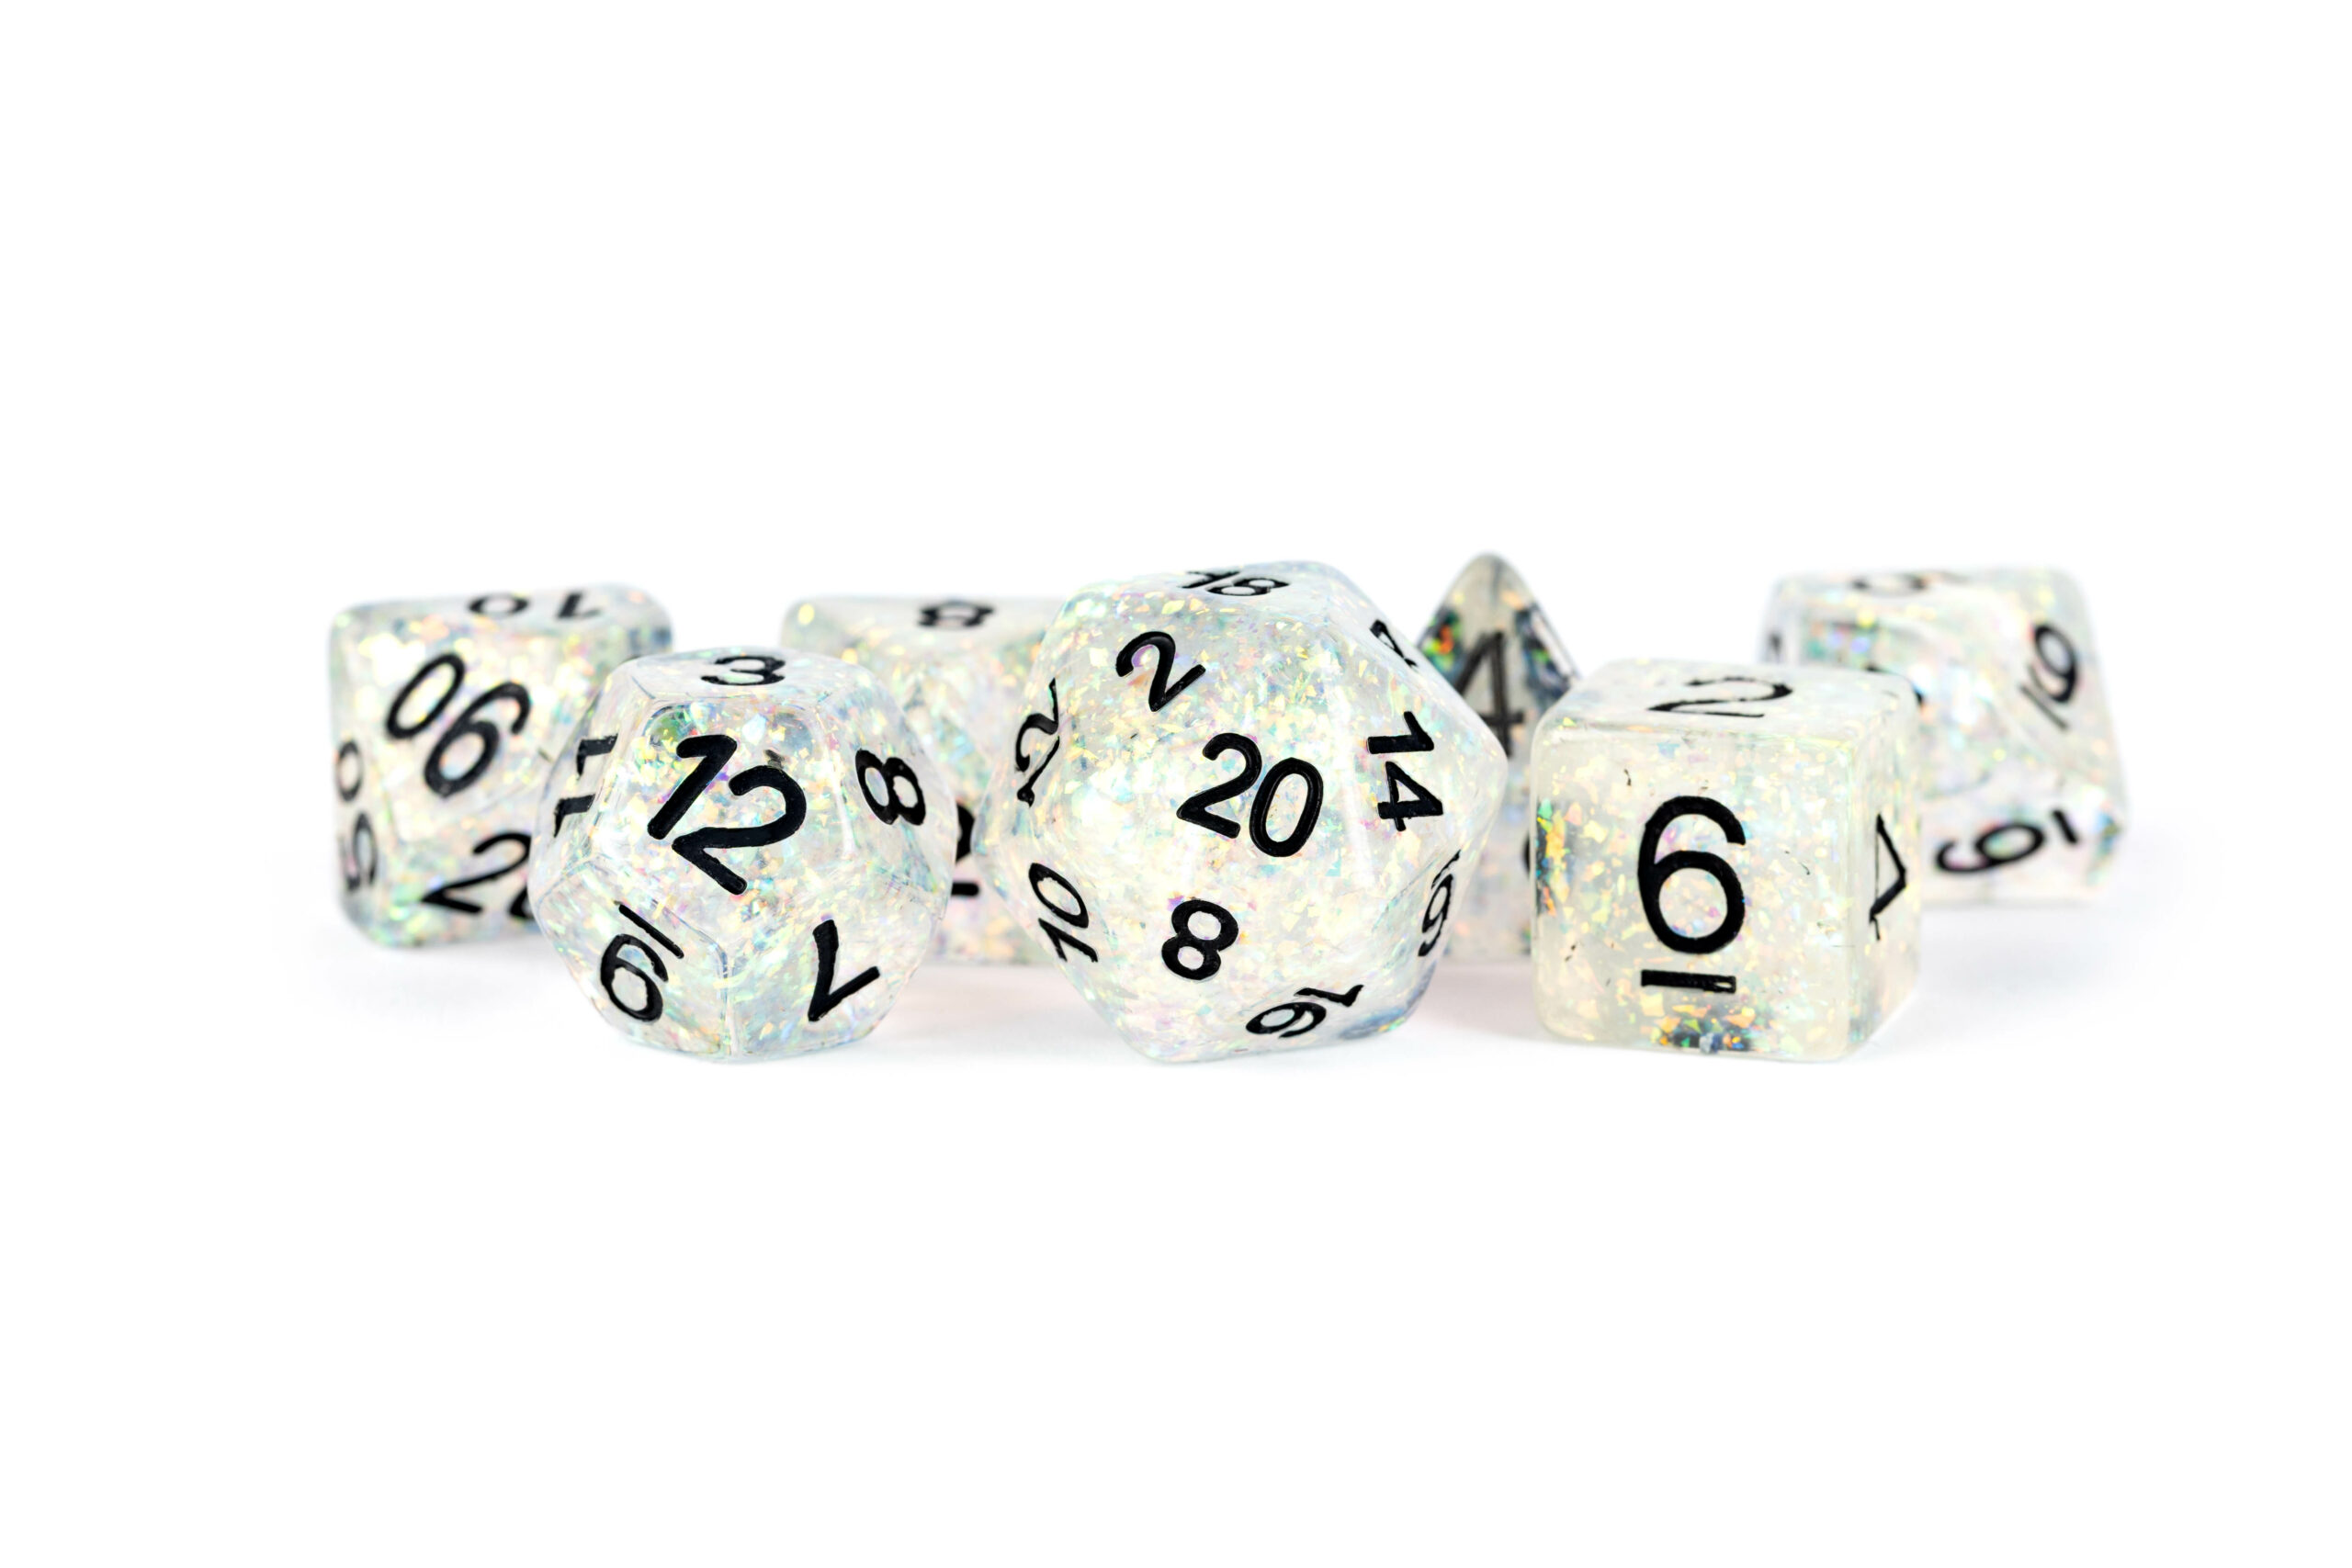 out of print flash dice clear with black numbers